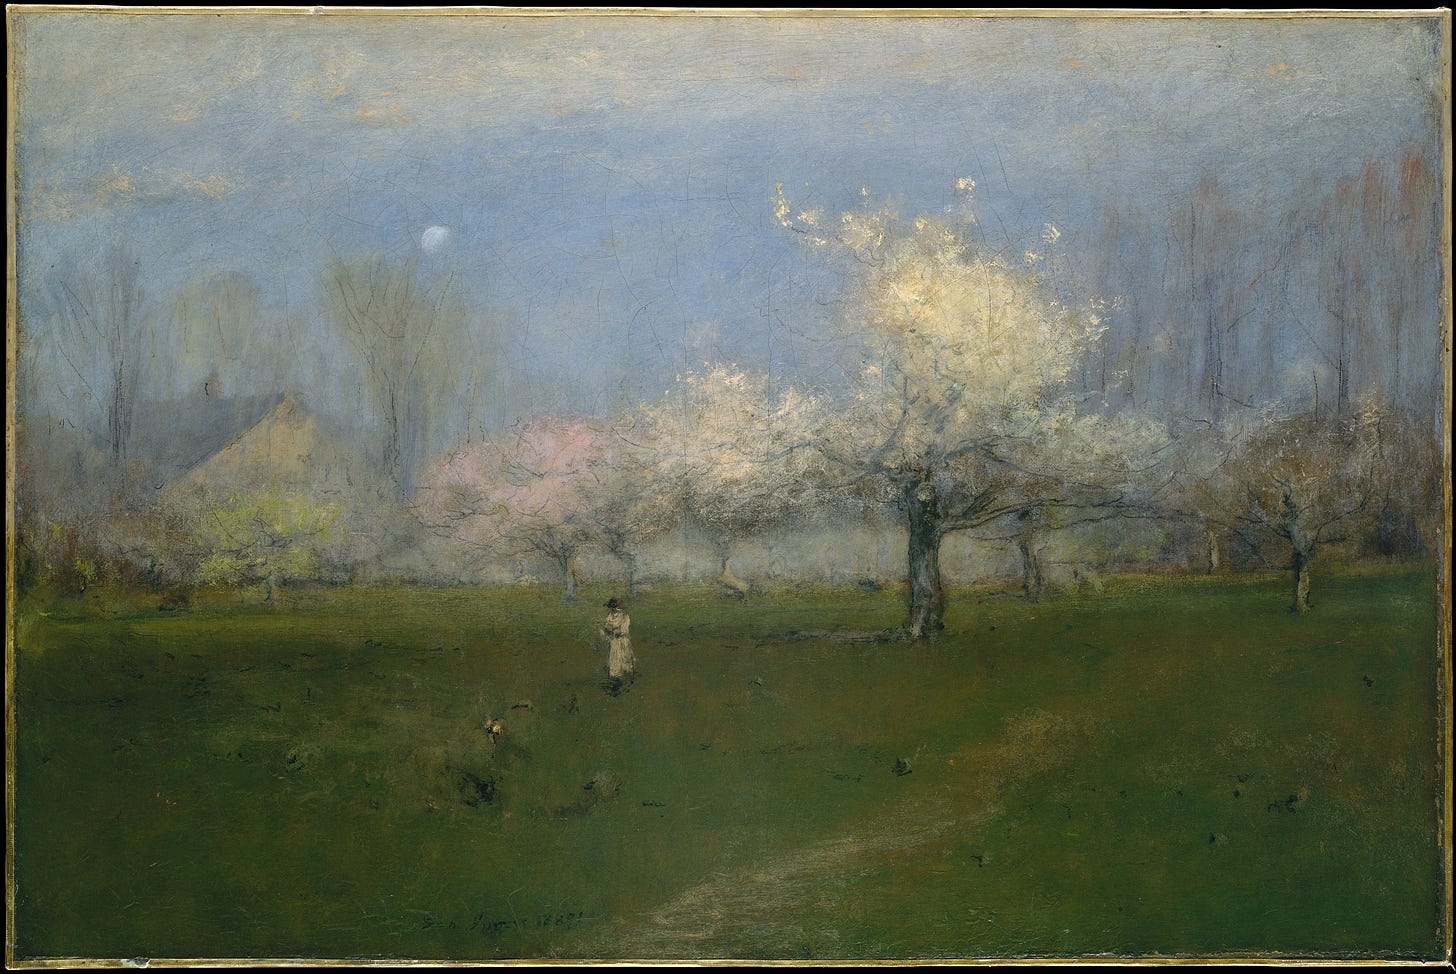 Painting of figure in front of flowering trees